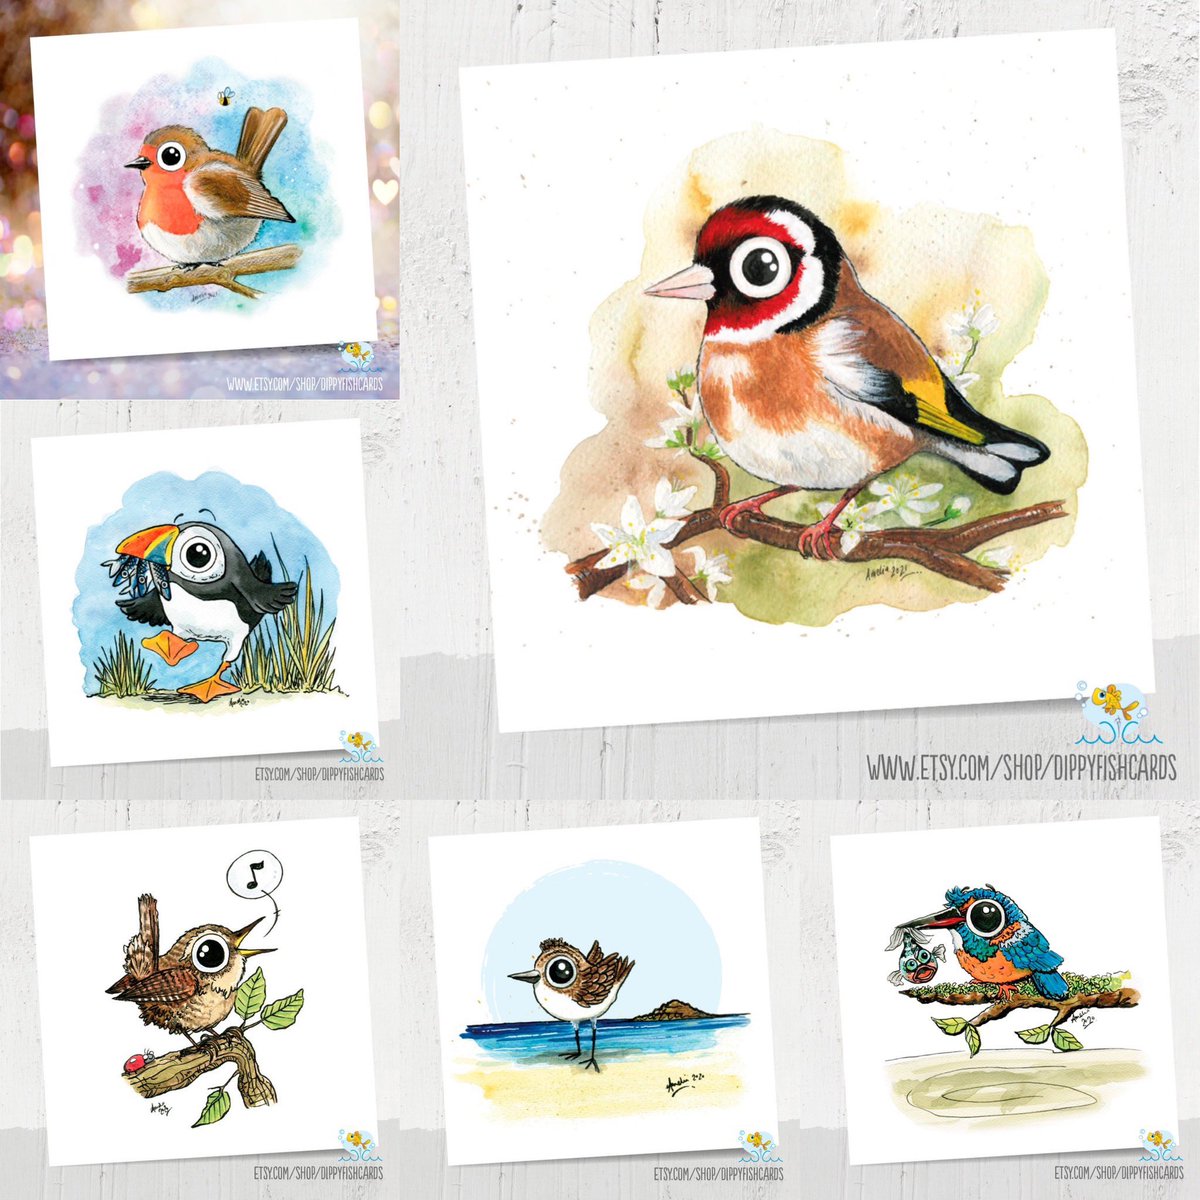 Dad received ALL of my Father’s Day cards at one point or another - they’ve been road tested by THE BEST! But he definitely had a penchant for THE BIRDS. Feathery and otherwise. Here are a load of birb cards for if your dad loves a bird too #mhhsbd #ukgiftam Link in comment